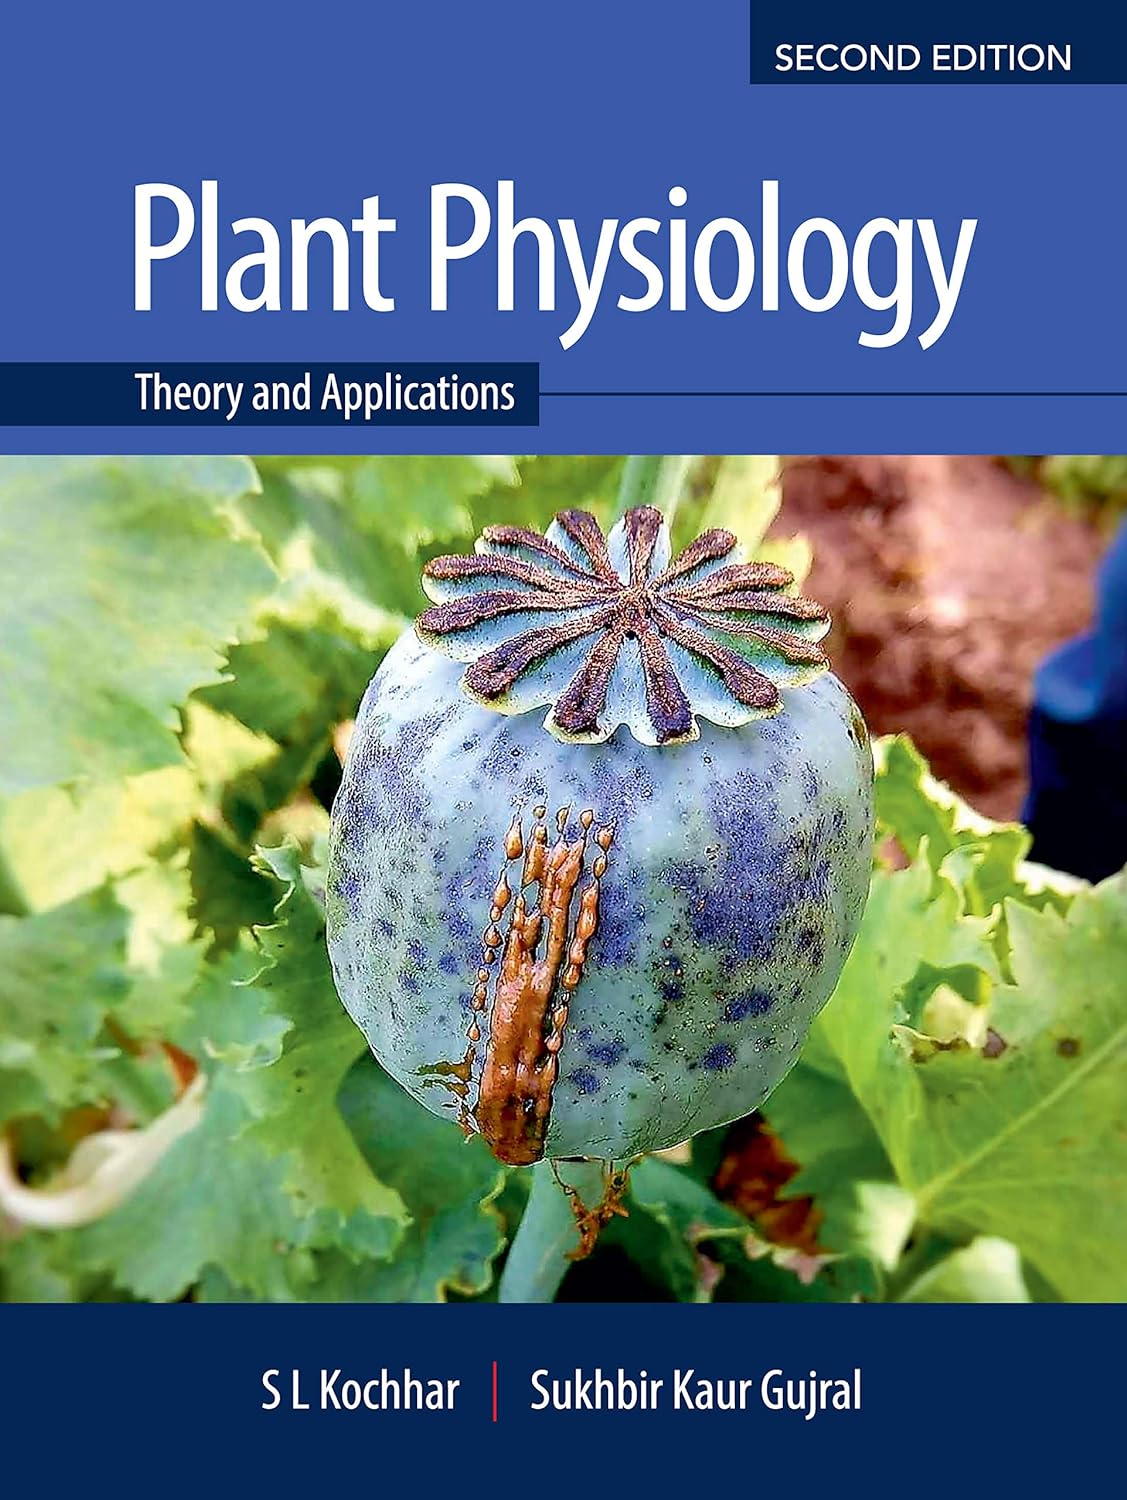 Plant Physiology Theory and Applications 2nd Edition